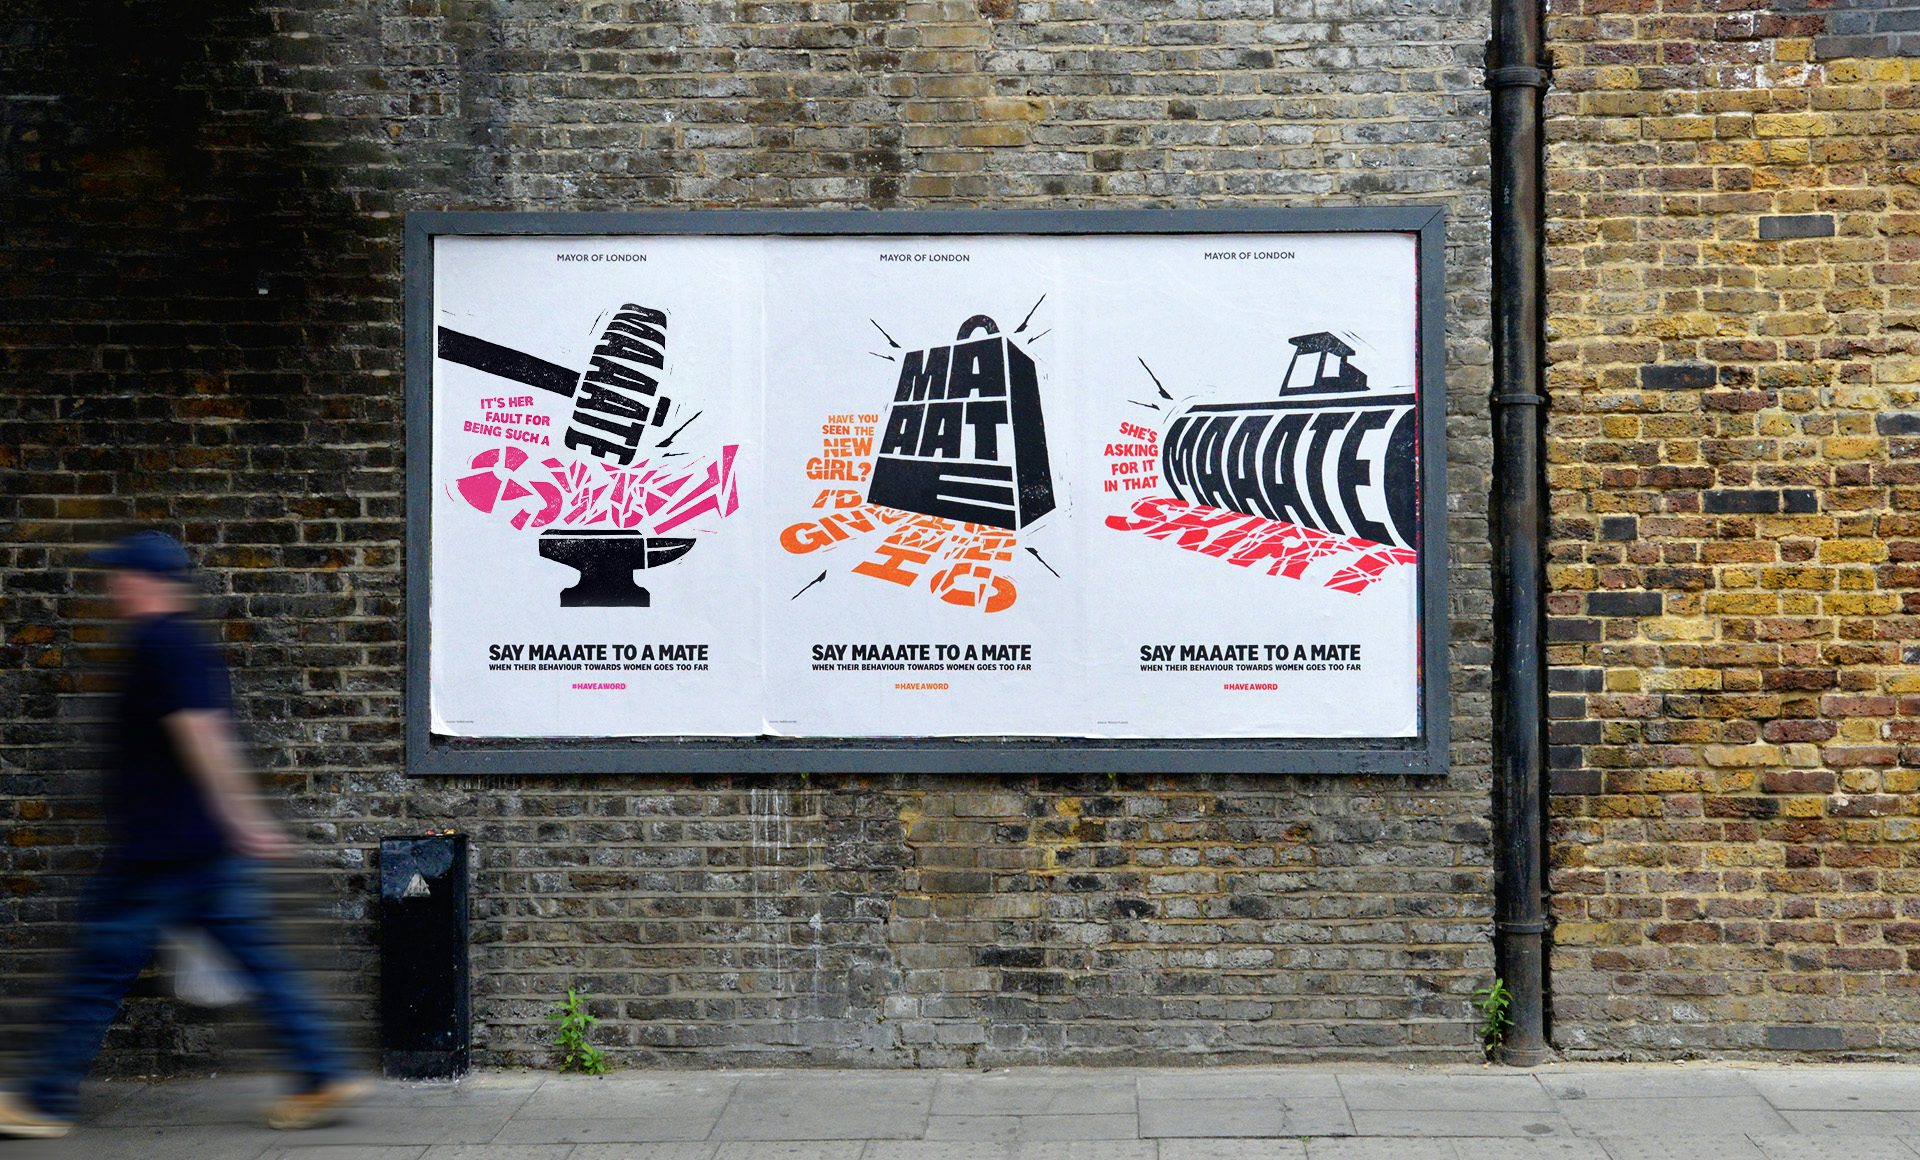 Photograph of Mayor of London's Maaate campaign shown on outdoor flyposters, designed with the words 'maaate' in the shape of a steamroller, an anville, and a gavel